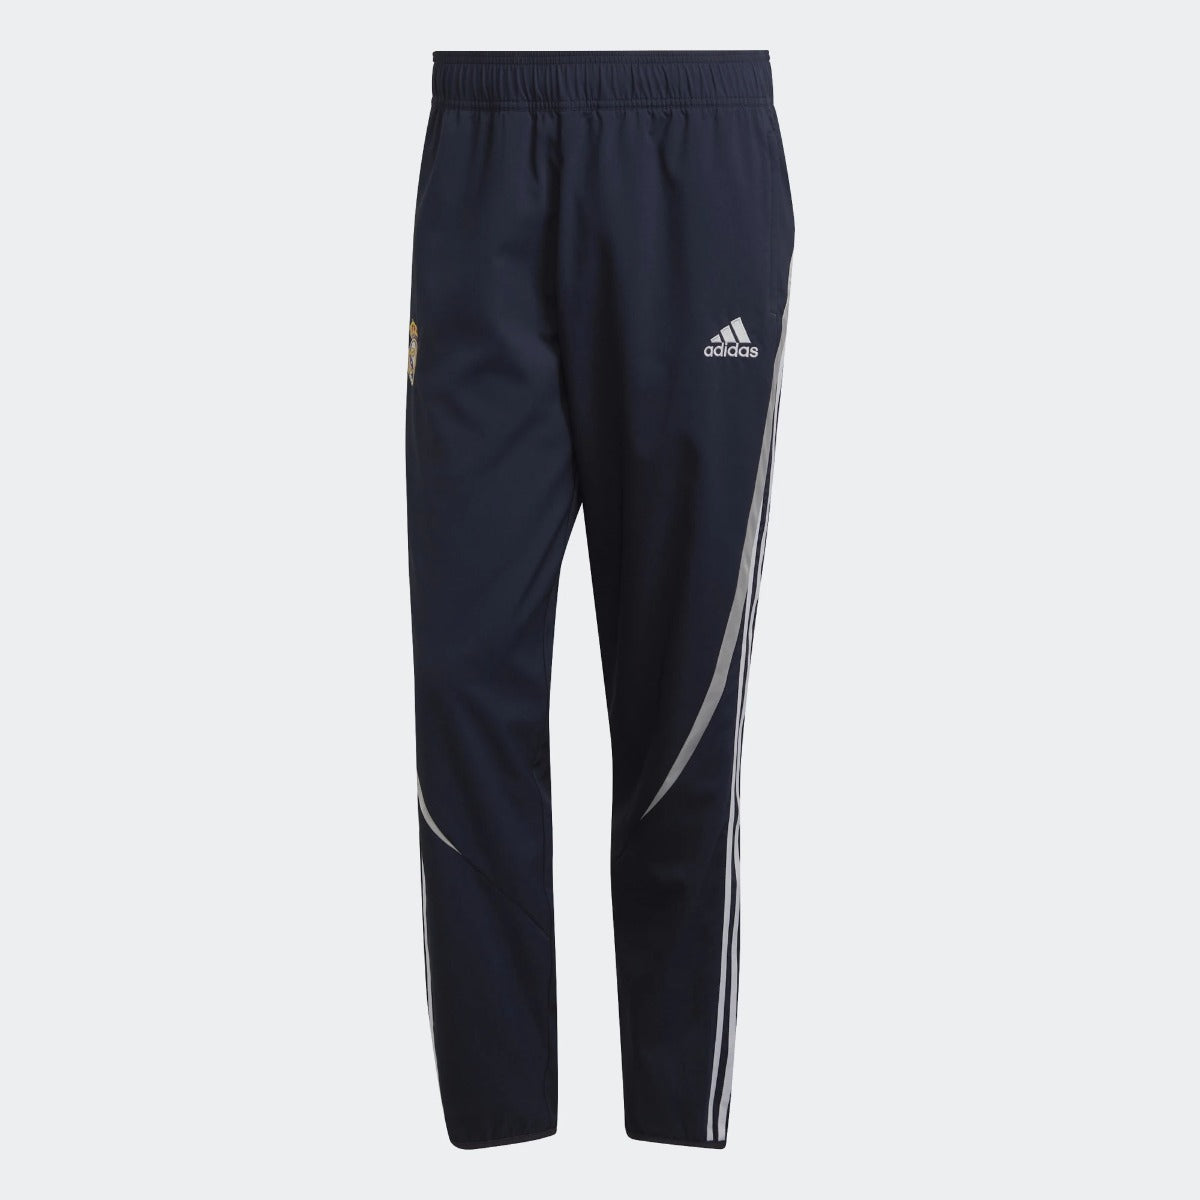 adidas 2021-22 Real Madrid Teamgeist Woven Pants - Night Navy (Front)